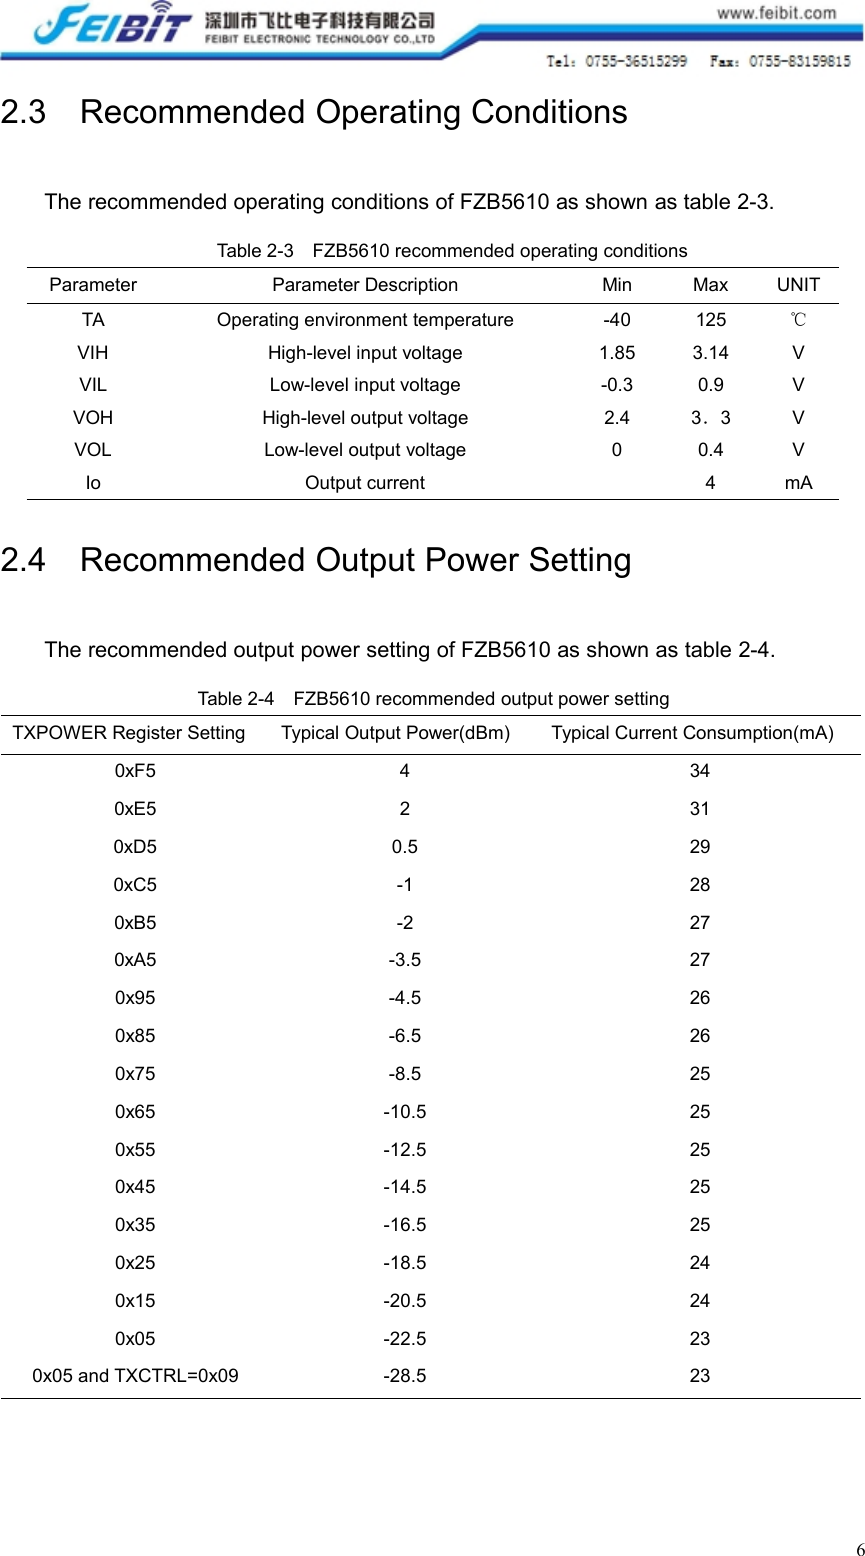 62.3 Recommended Operating ConditionsThe recommended operating conditions of FZB5610 as shown as table 2-3.Table 2-3 FZB5610 recommended operating conditionsParameterParameter DescriptionMinMaxUNITTAOperating environment temperature-40125℃VIHHigh-level input voltage1.853.14VVILLow-level input voltage-0.30.9VVOHHigh-level output voltage2.43．3VVOLLow-level output voltage00.4VIoOutput current4mA2.4 Recommended Output Power SettingThe recommended output power setting of FZB5610 as shown as table 2-4.Table 2-4 FZB5610 recommended output power settingTXPOWER Register SettingTypical Output Power(dBm)Typical Current Consumption(mA)0xF54340xE52310xD50.5290xC5-1280xB5-2270xA5-3.5270x95-4.5260x85-6.5260x75-8.5250x65-10.5250x55-12.5250x45-14.5250x35-16.5250x25-18.5240x15-20.5240x05-22.5230x05 and TXCTRL=0x09-28.523